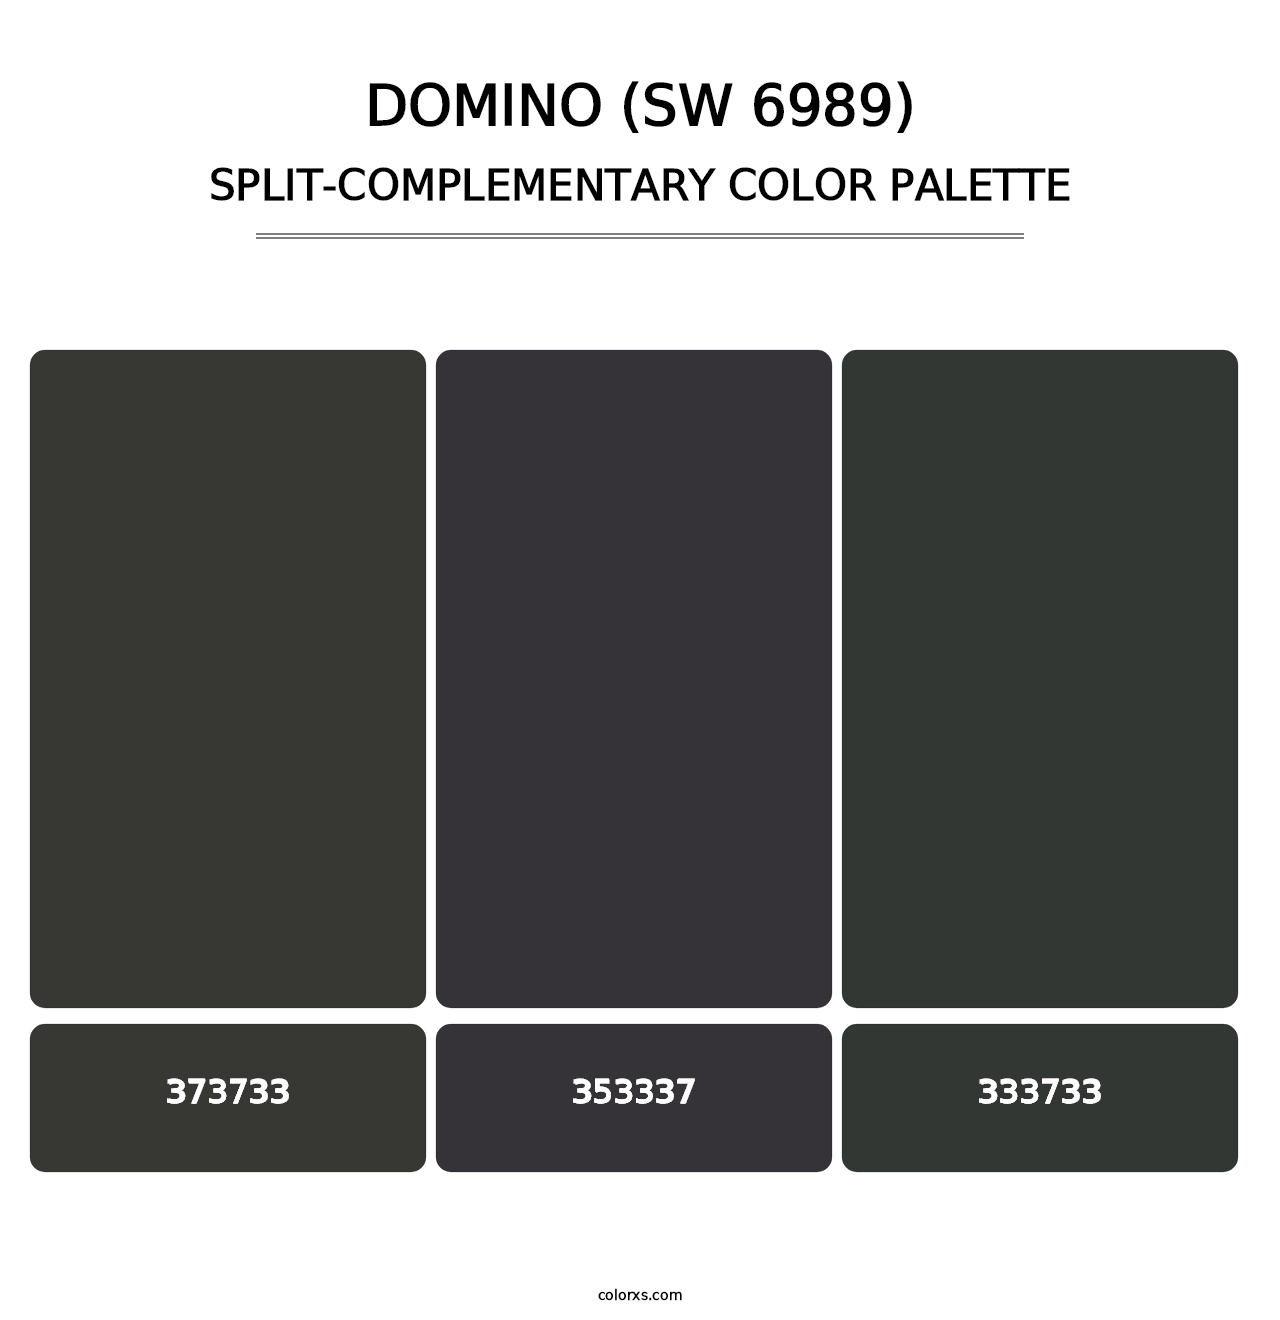 Domino (SW 6989) - Split-Complementary Color Palette